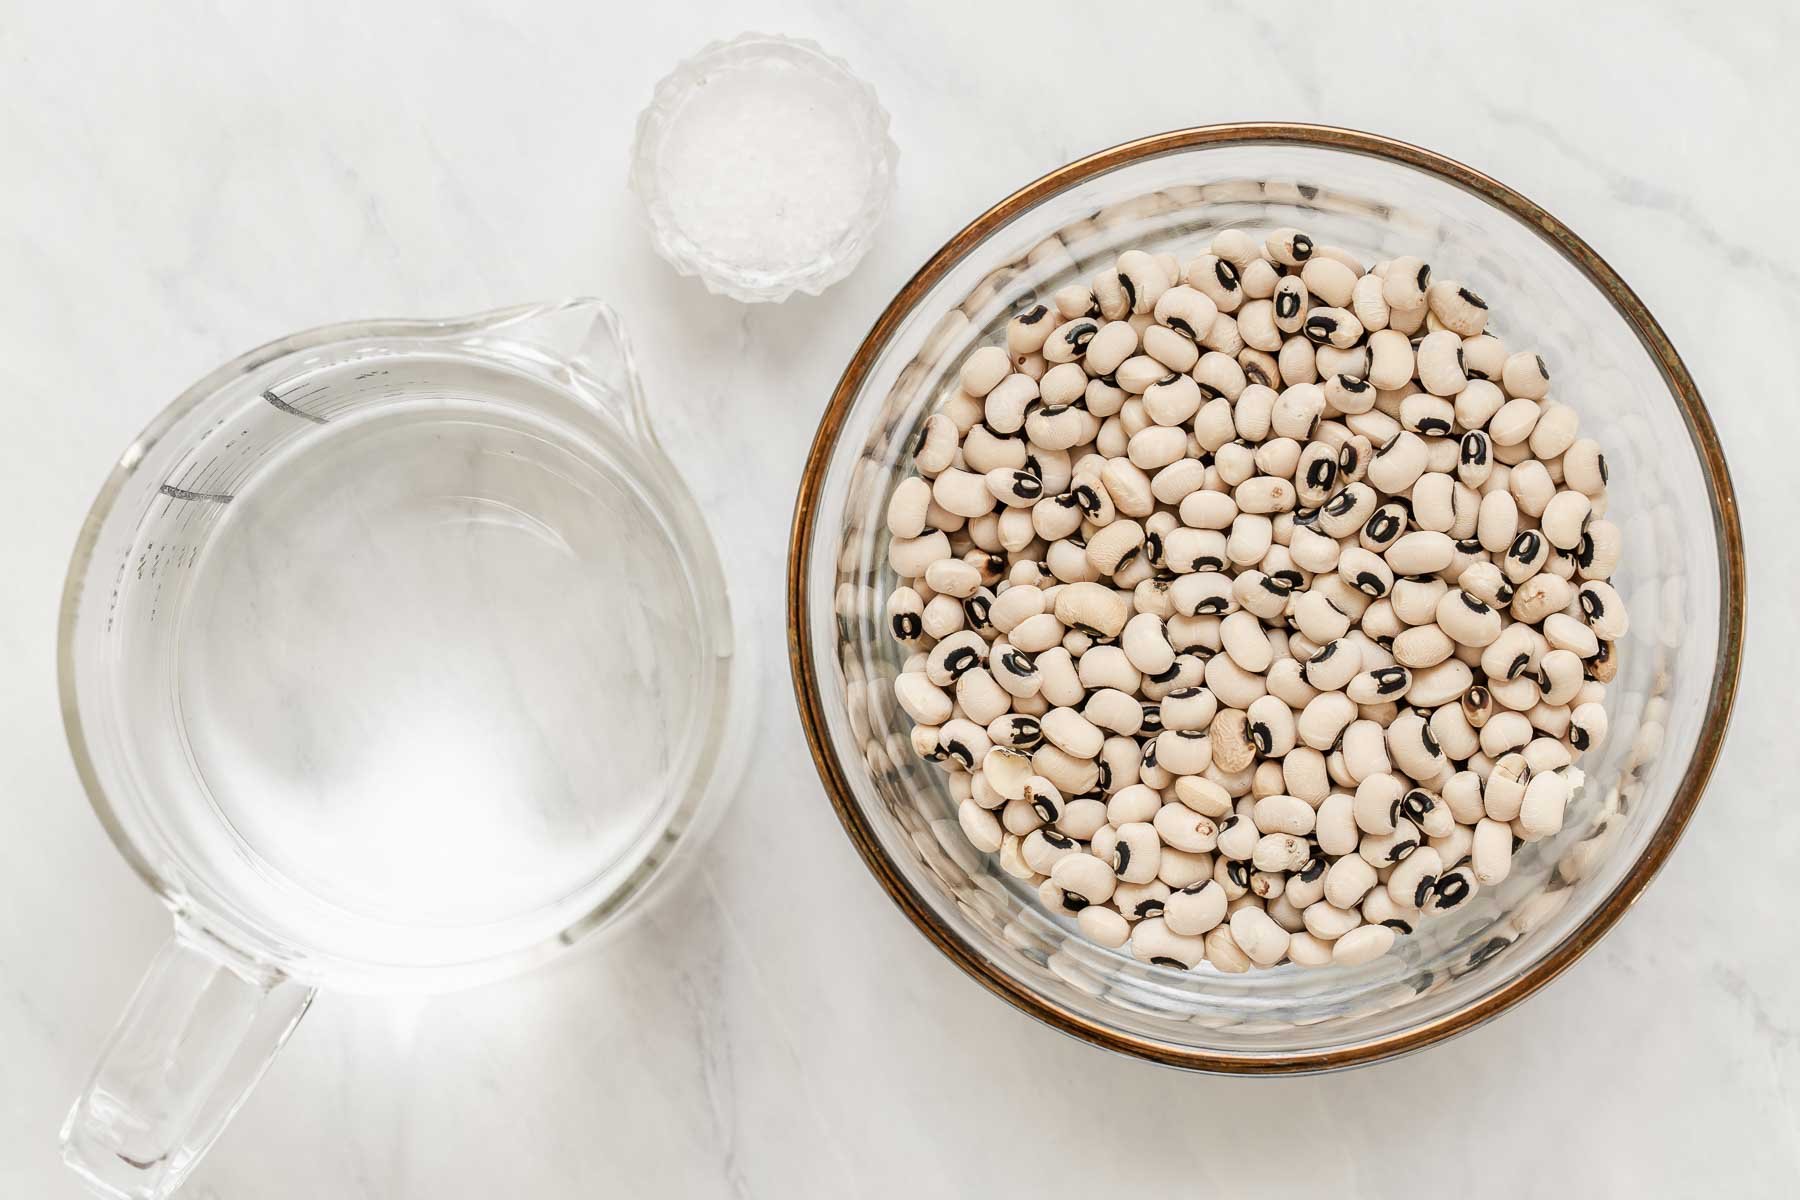 Horizontal image of dried black eyes peas, a cup of water and small dish of salt.